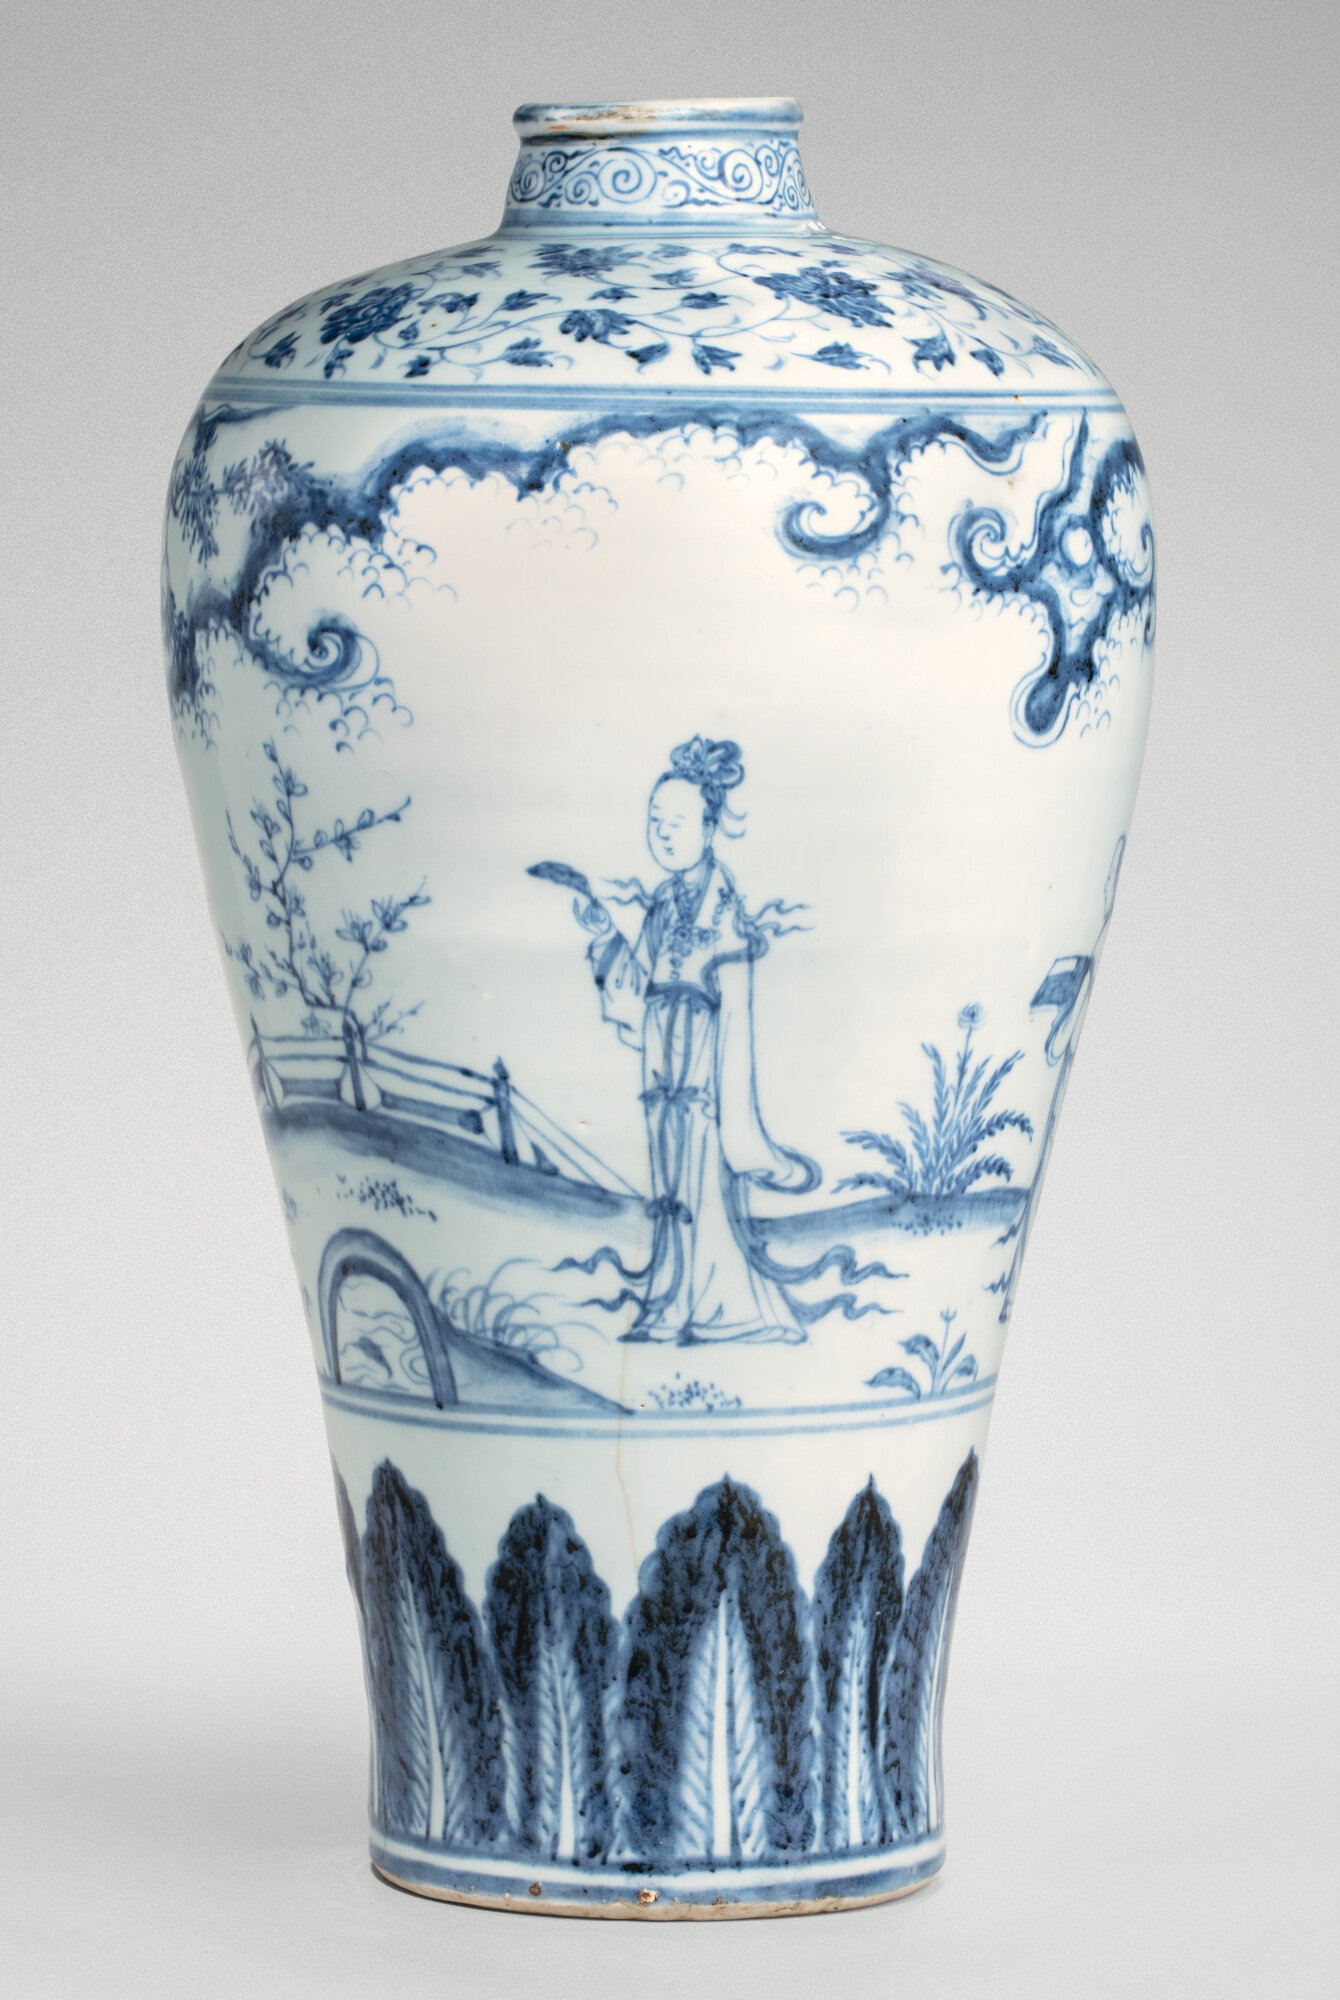 Ming dynasty Porcelains from a Japanese Private Collection at Sotheby's New  York, 11 September 2019 - Alain.R.Truong